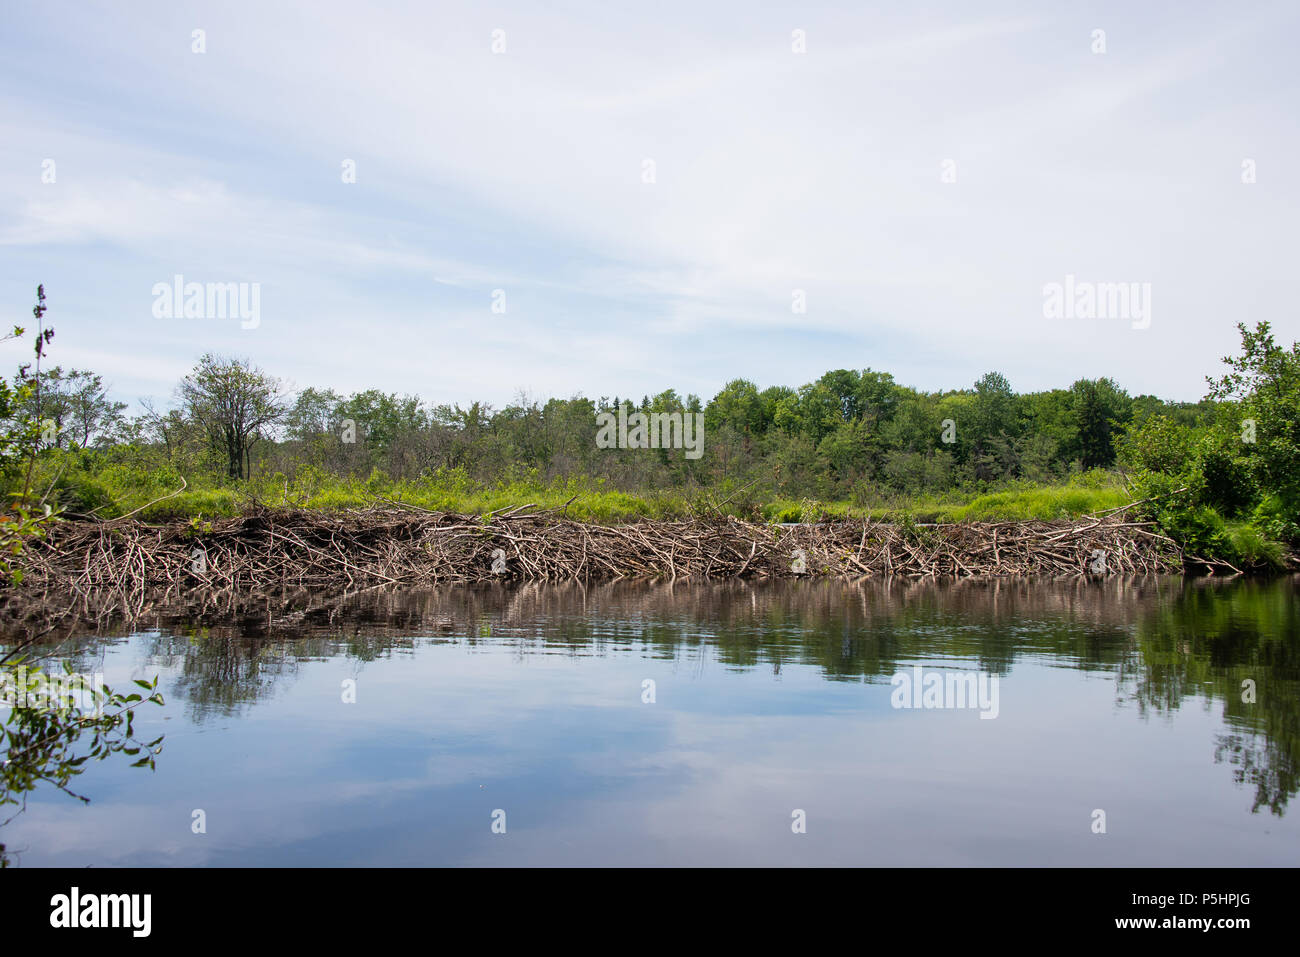 A typical beaver dam on the Kunjamuk River in the Adirondack Mountains, NY USA Stock Photo